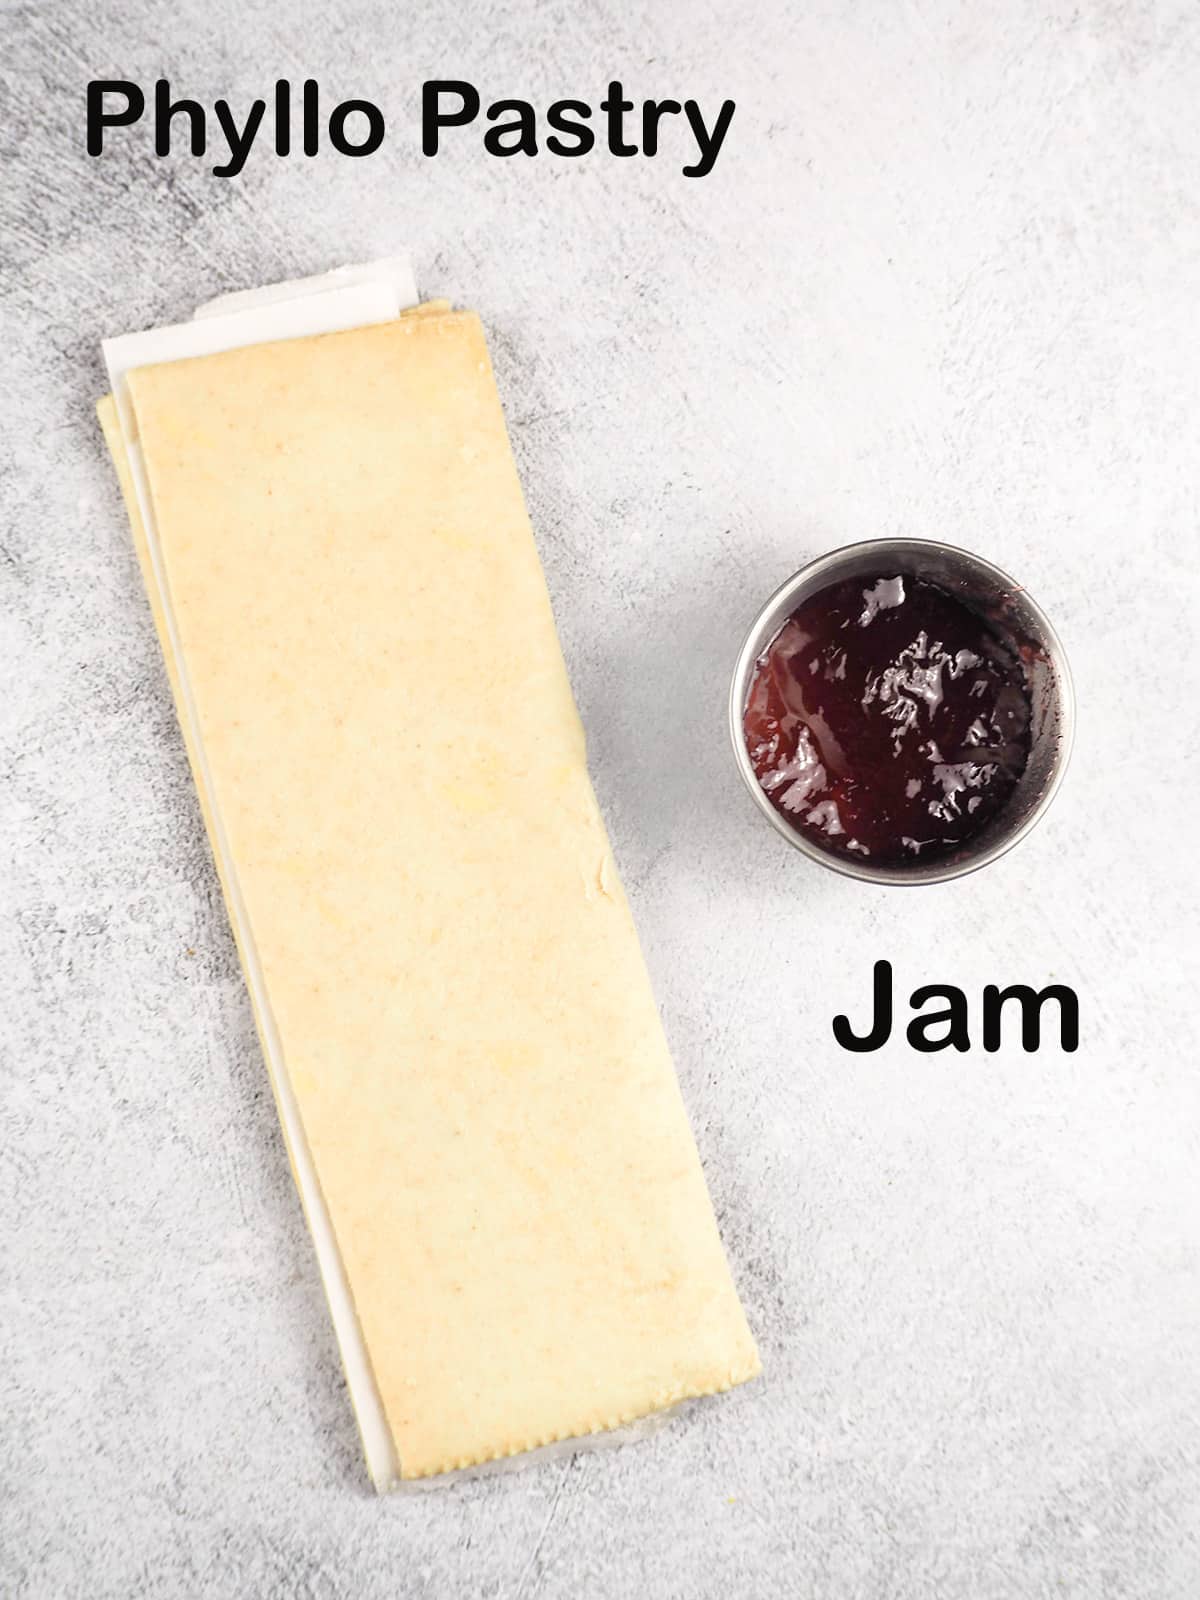 Ingredients for danishes: your favorite jam, and phyllo freezer pastry.